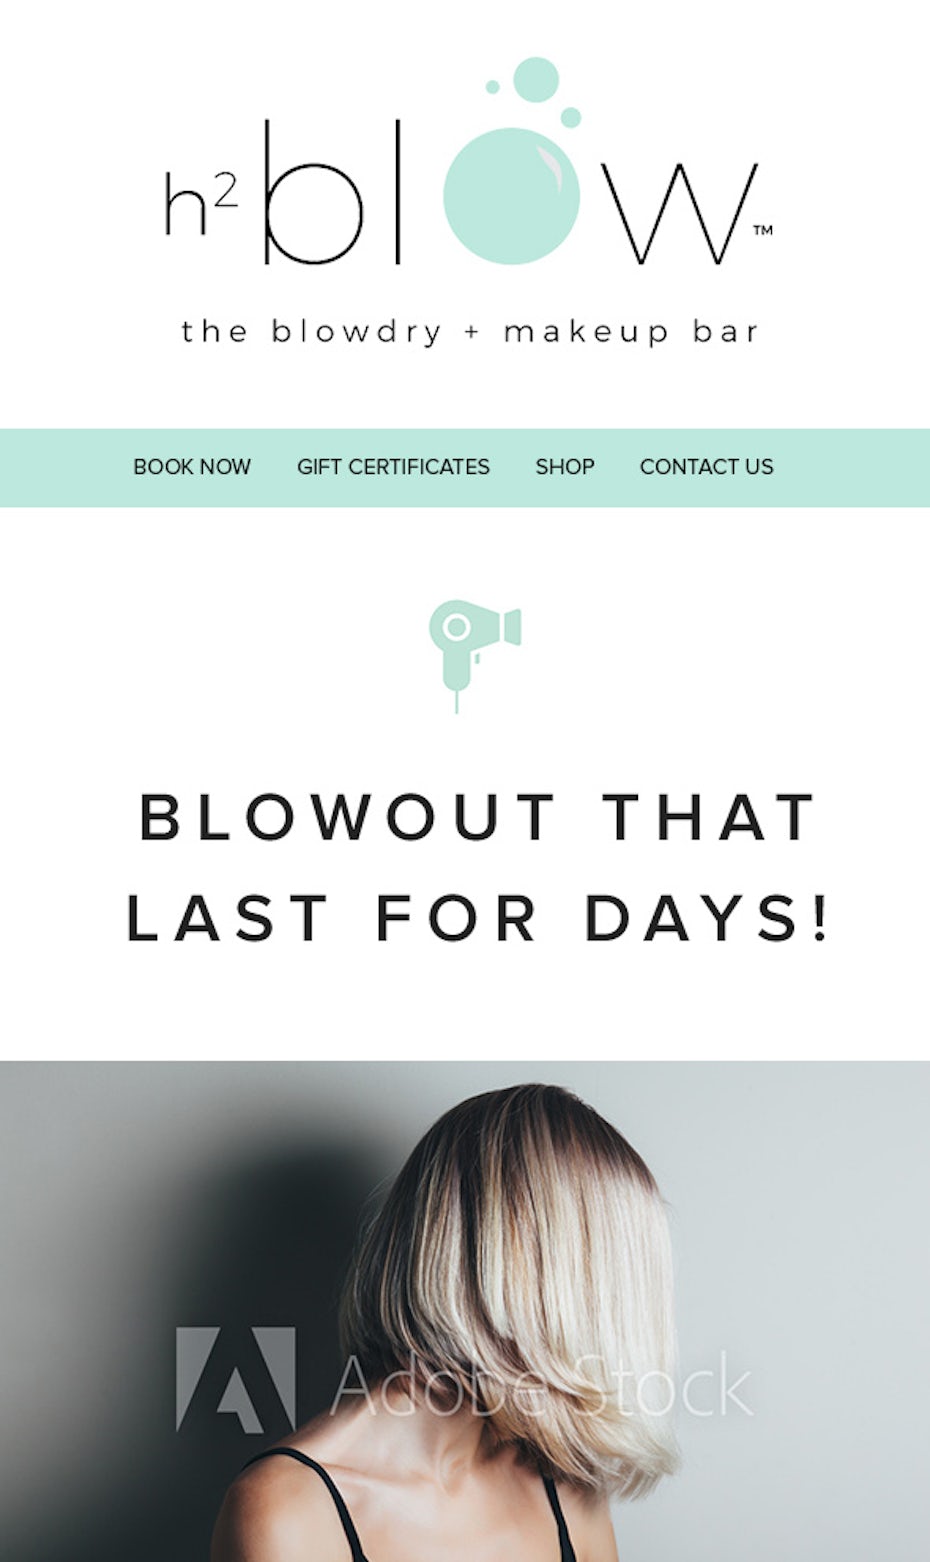 email design with mint accents and photographs of clients’ hairstyles